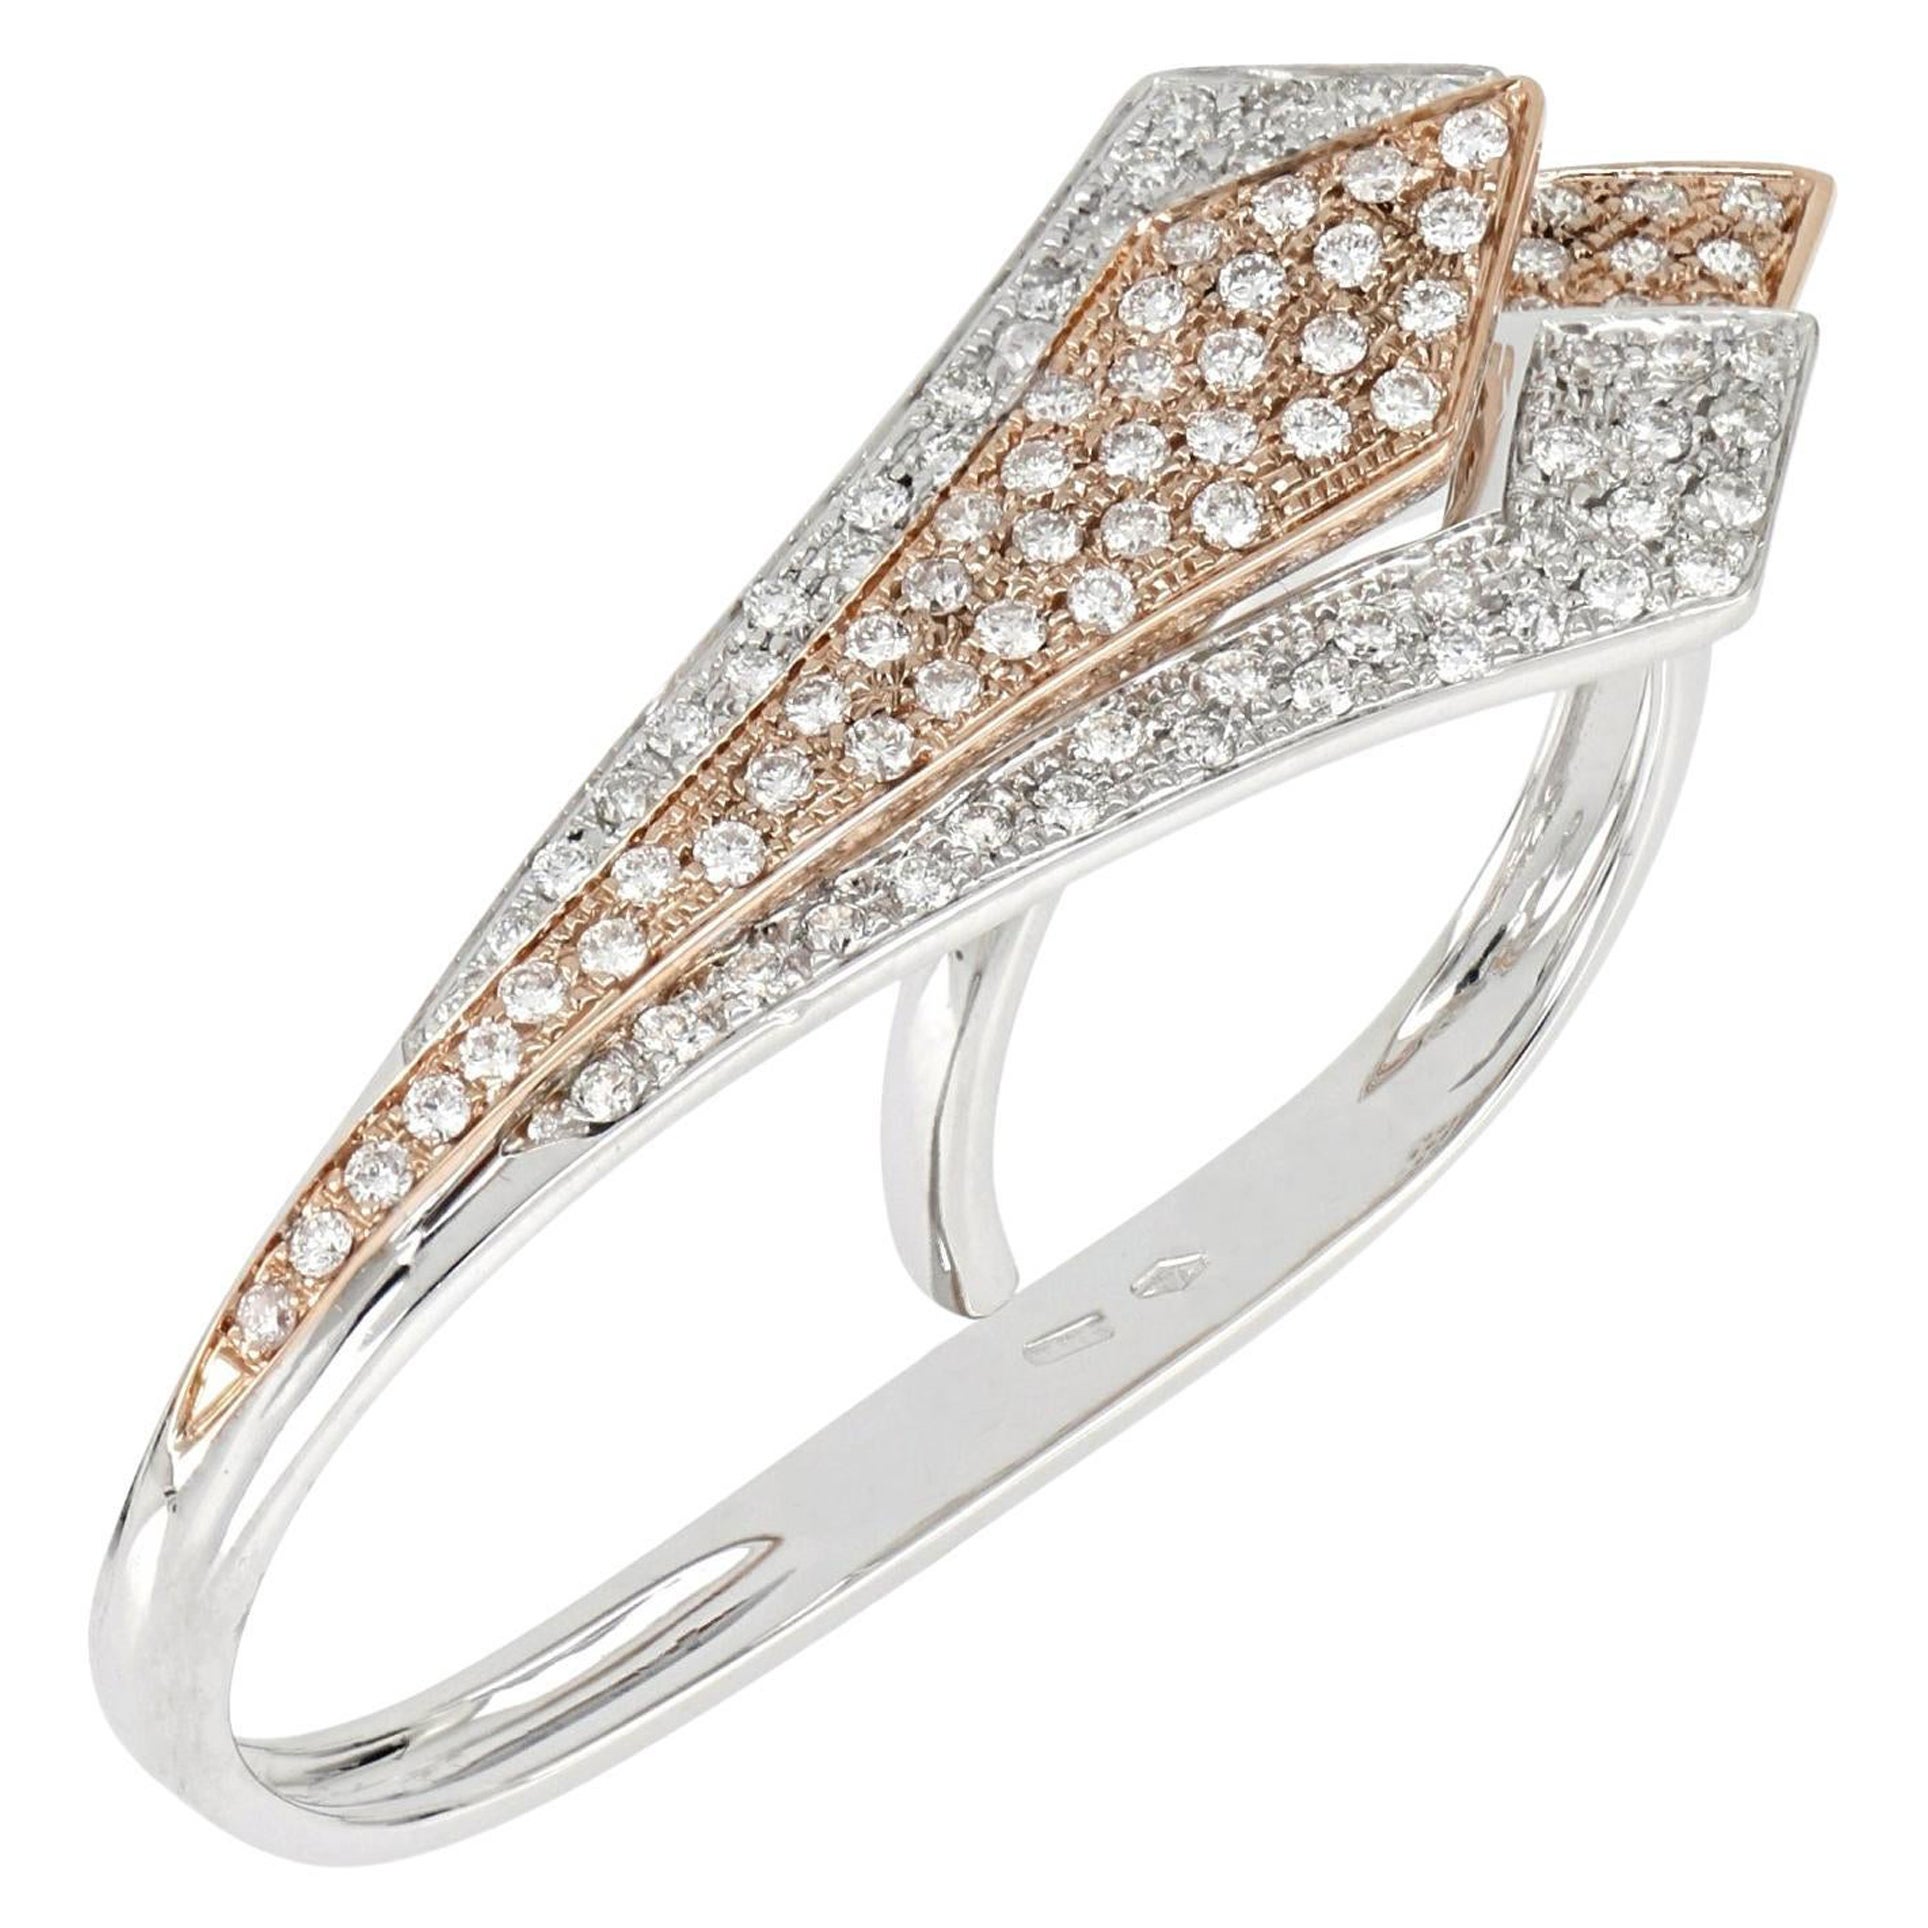 18kt White and Rose Gold Big 3 Chic Leaf Ring Enriched with Diamonds' Pavè